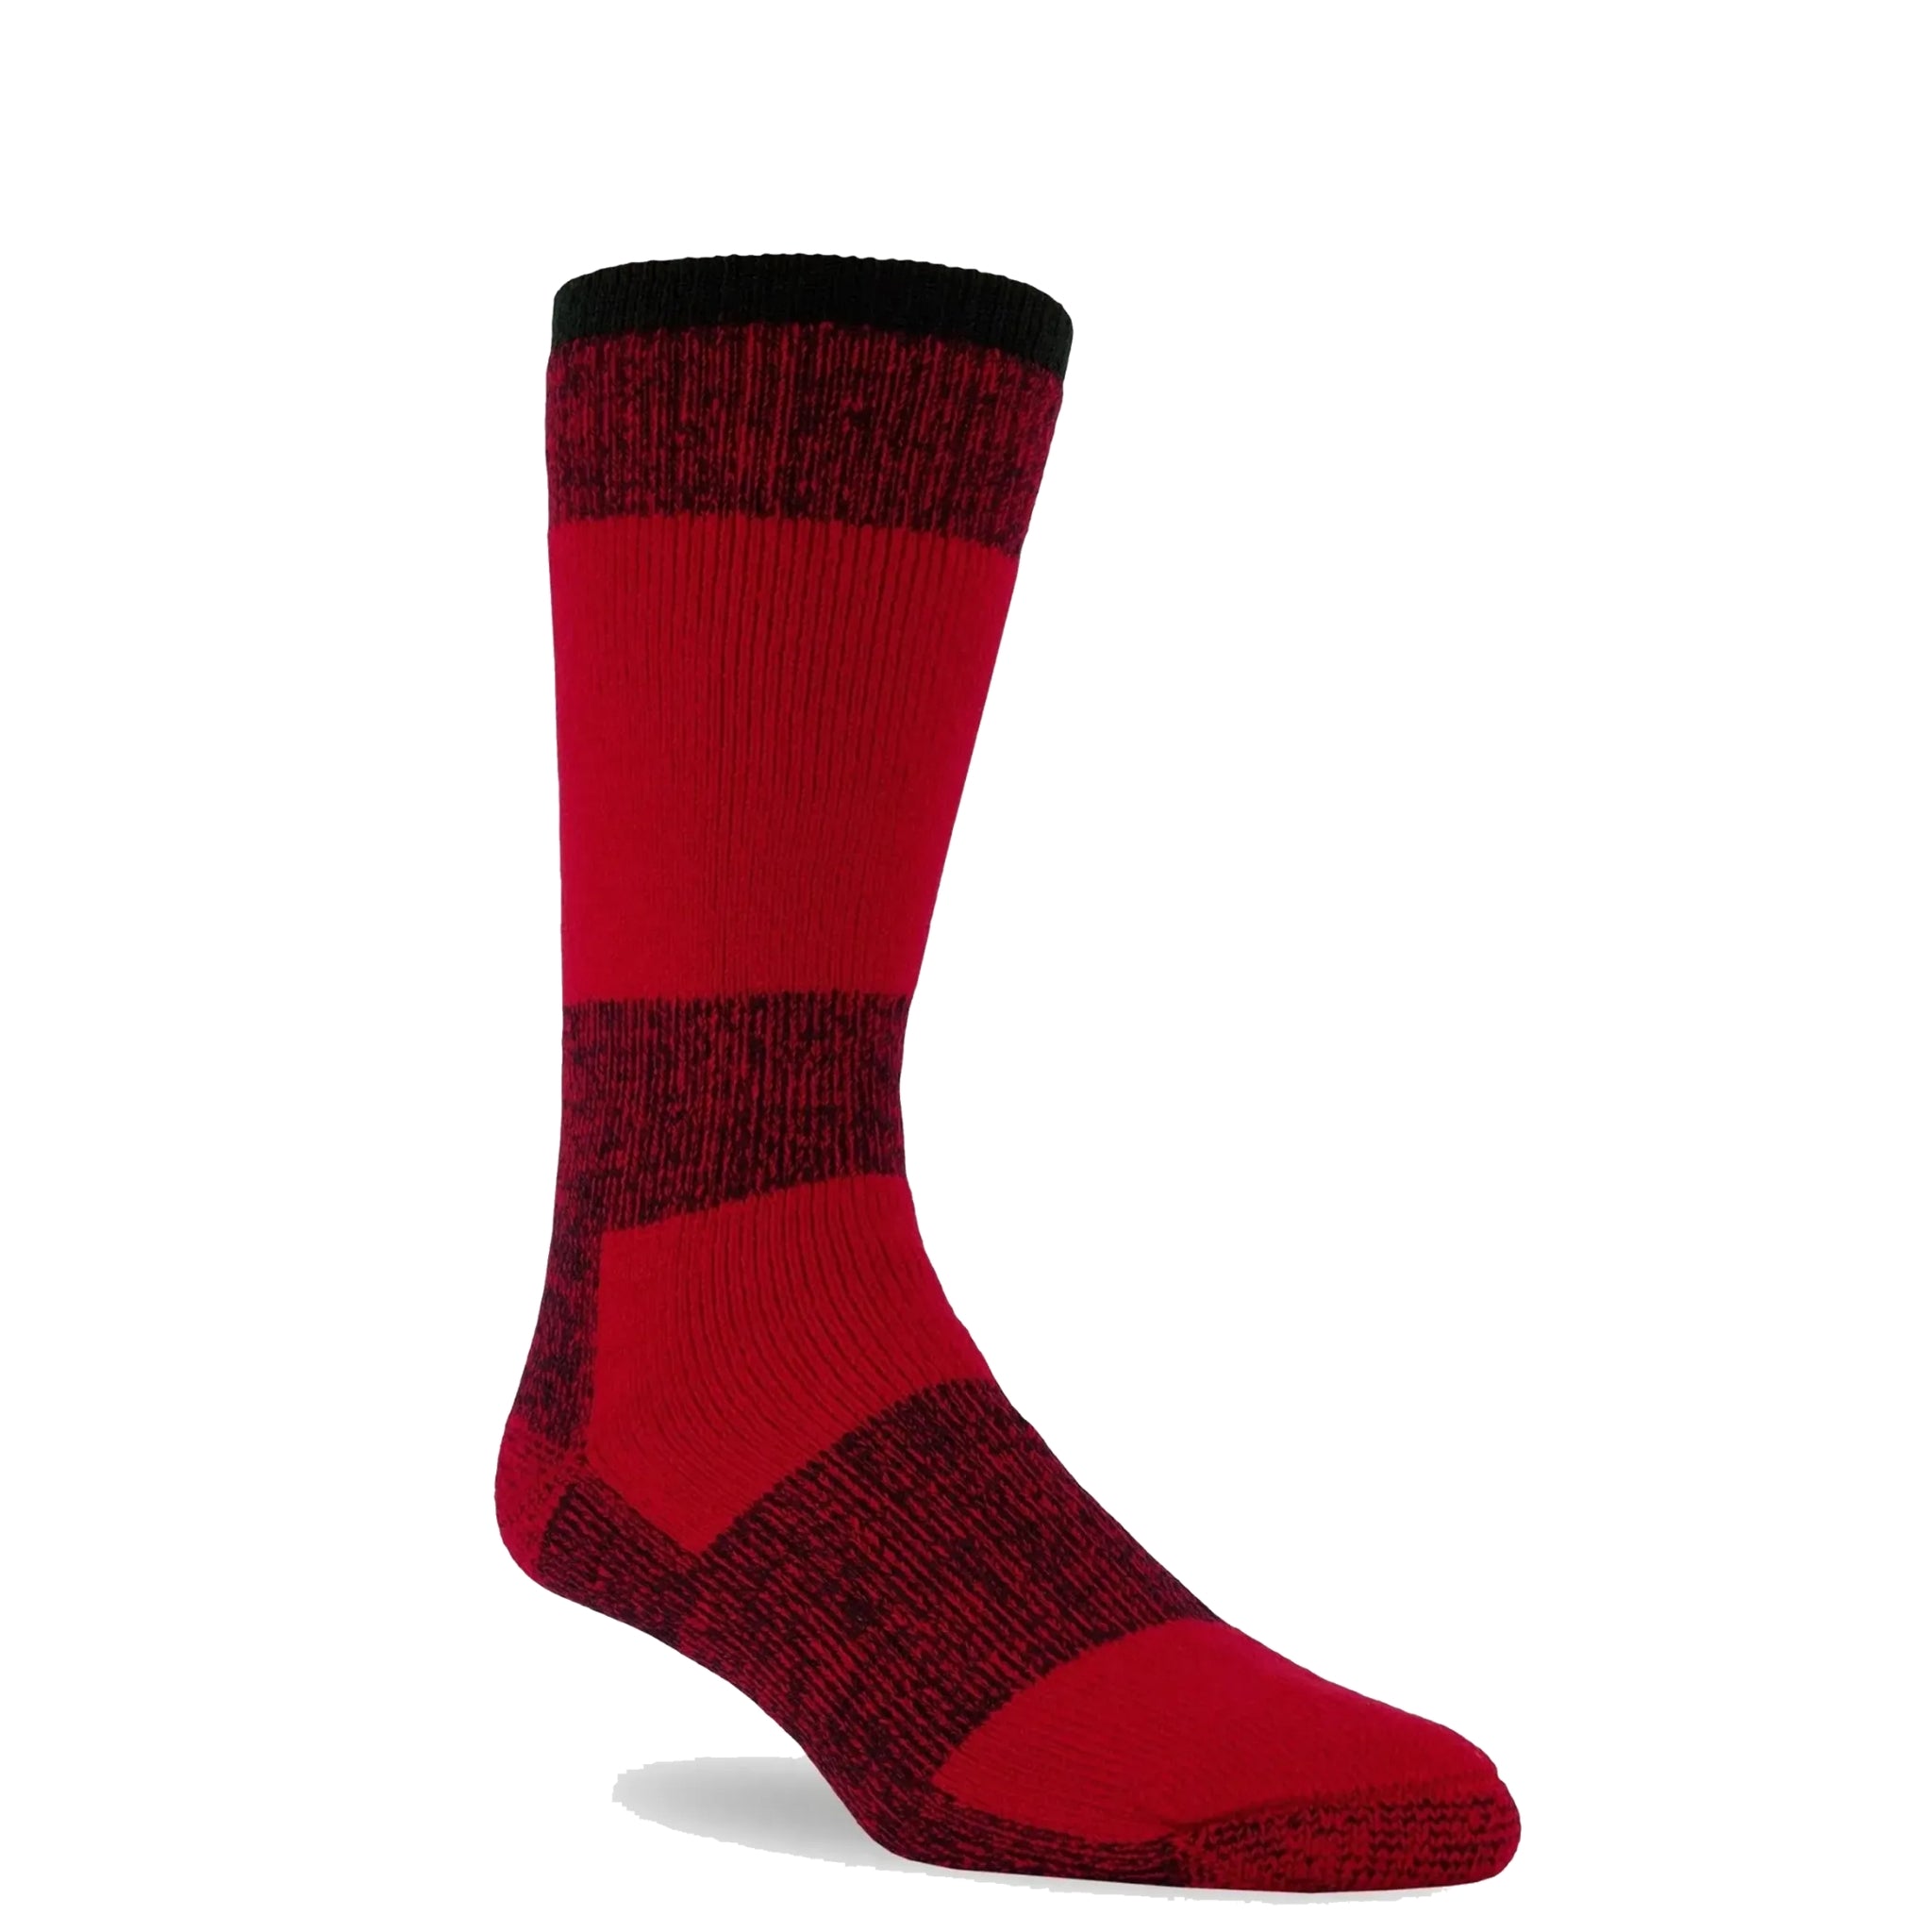 one red heavyweight sock standing on its own on a white background